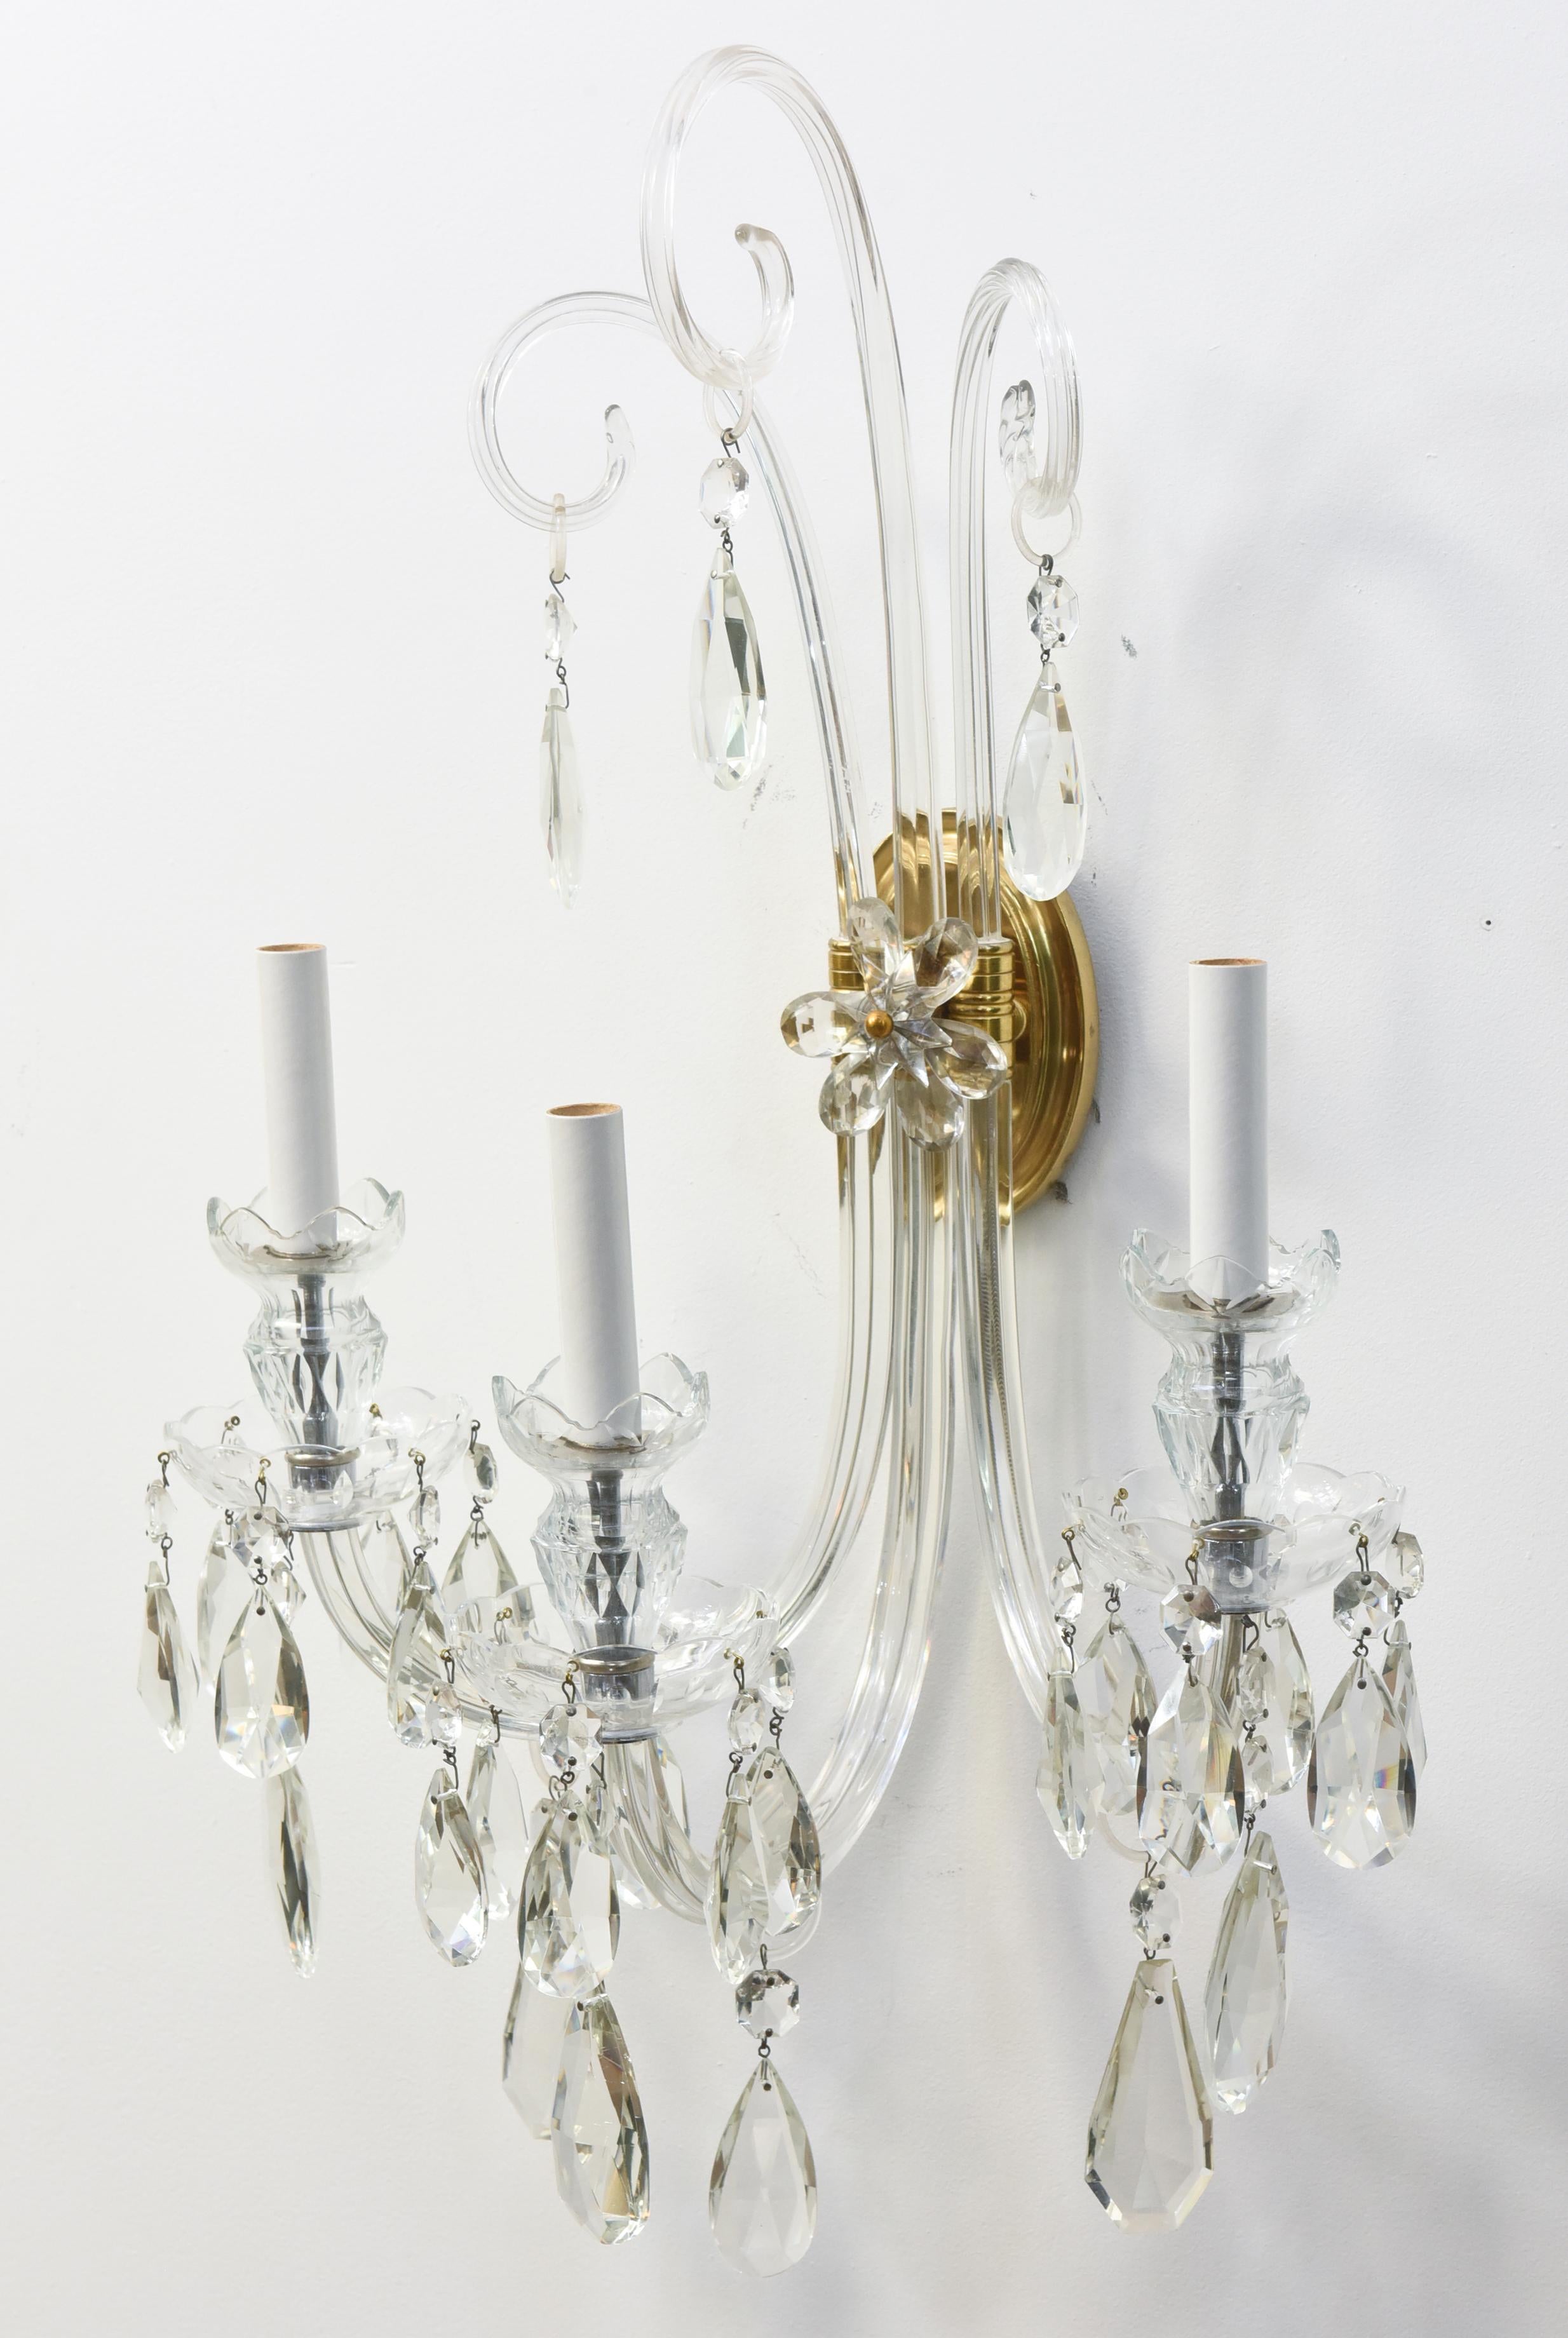 Czech Mid-20th Century Lafount Style Crystal Sconces, a Pair For Sale